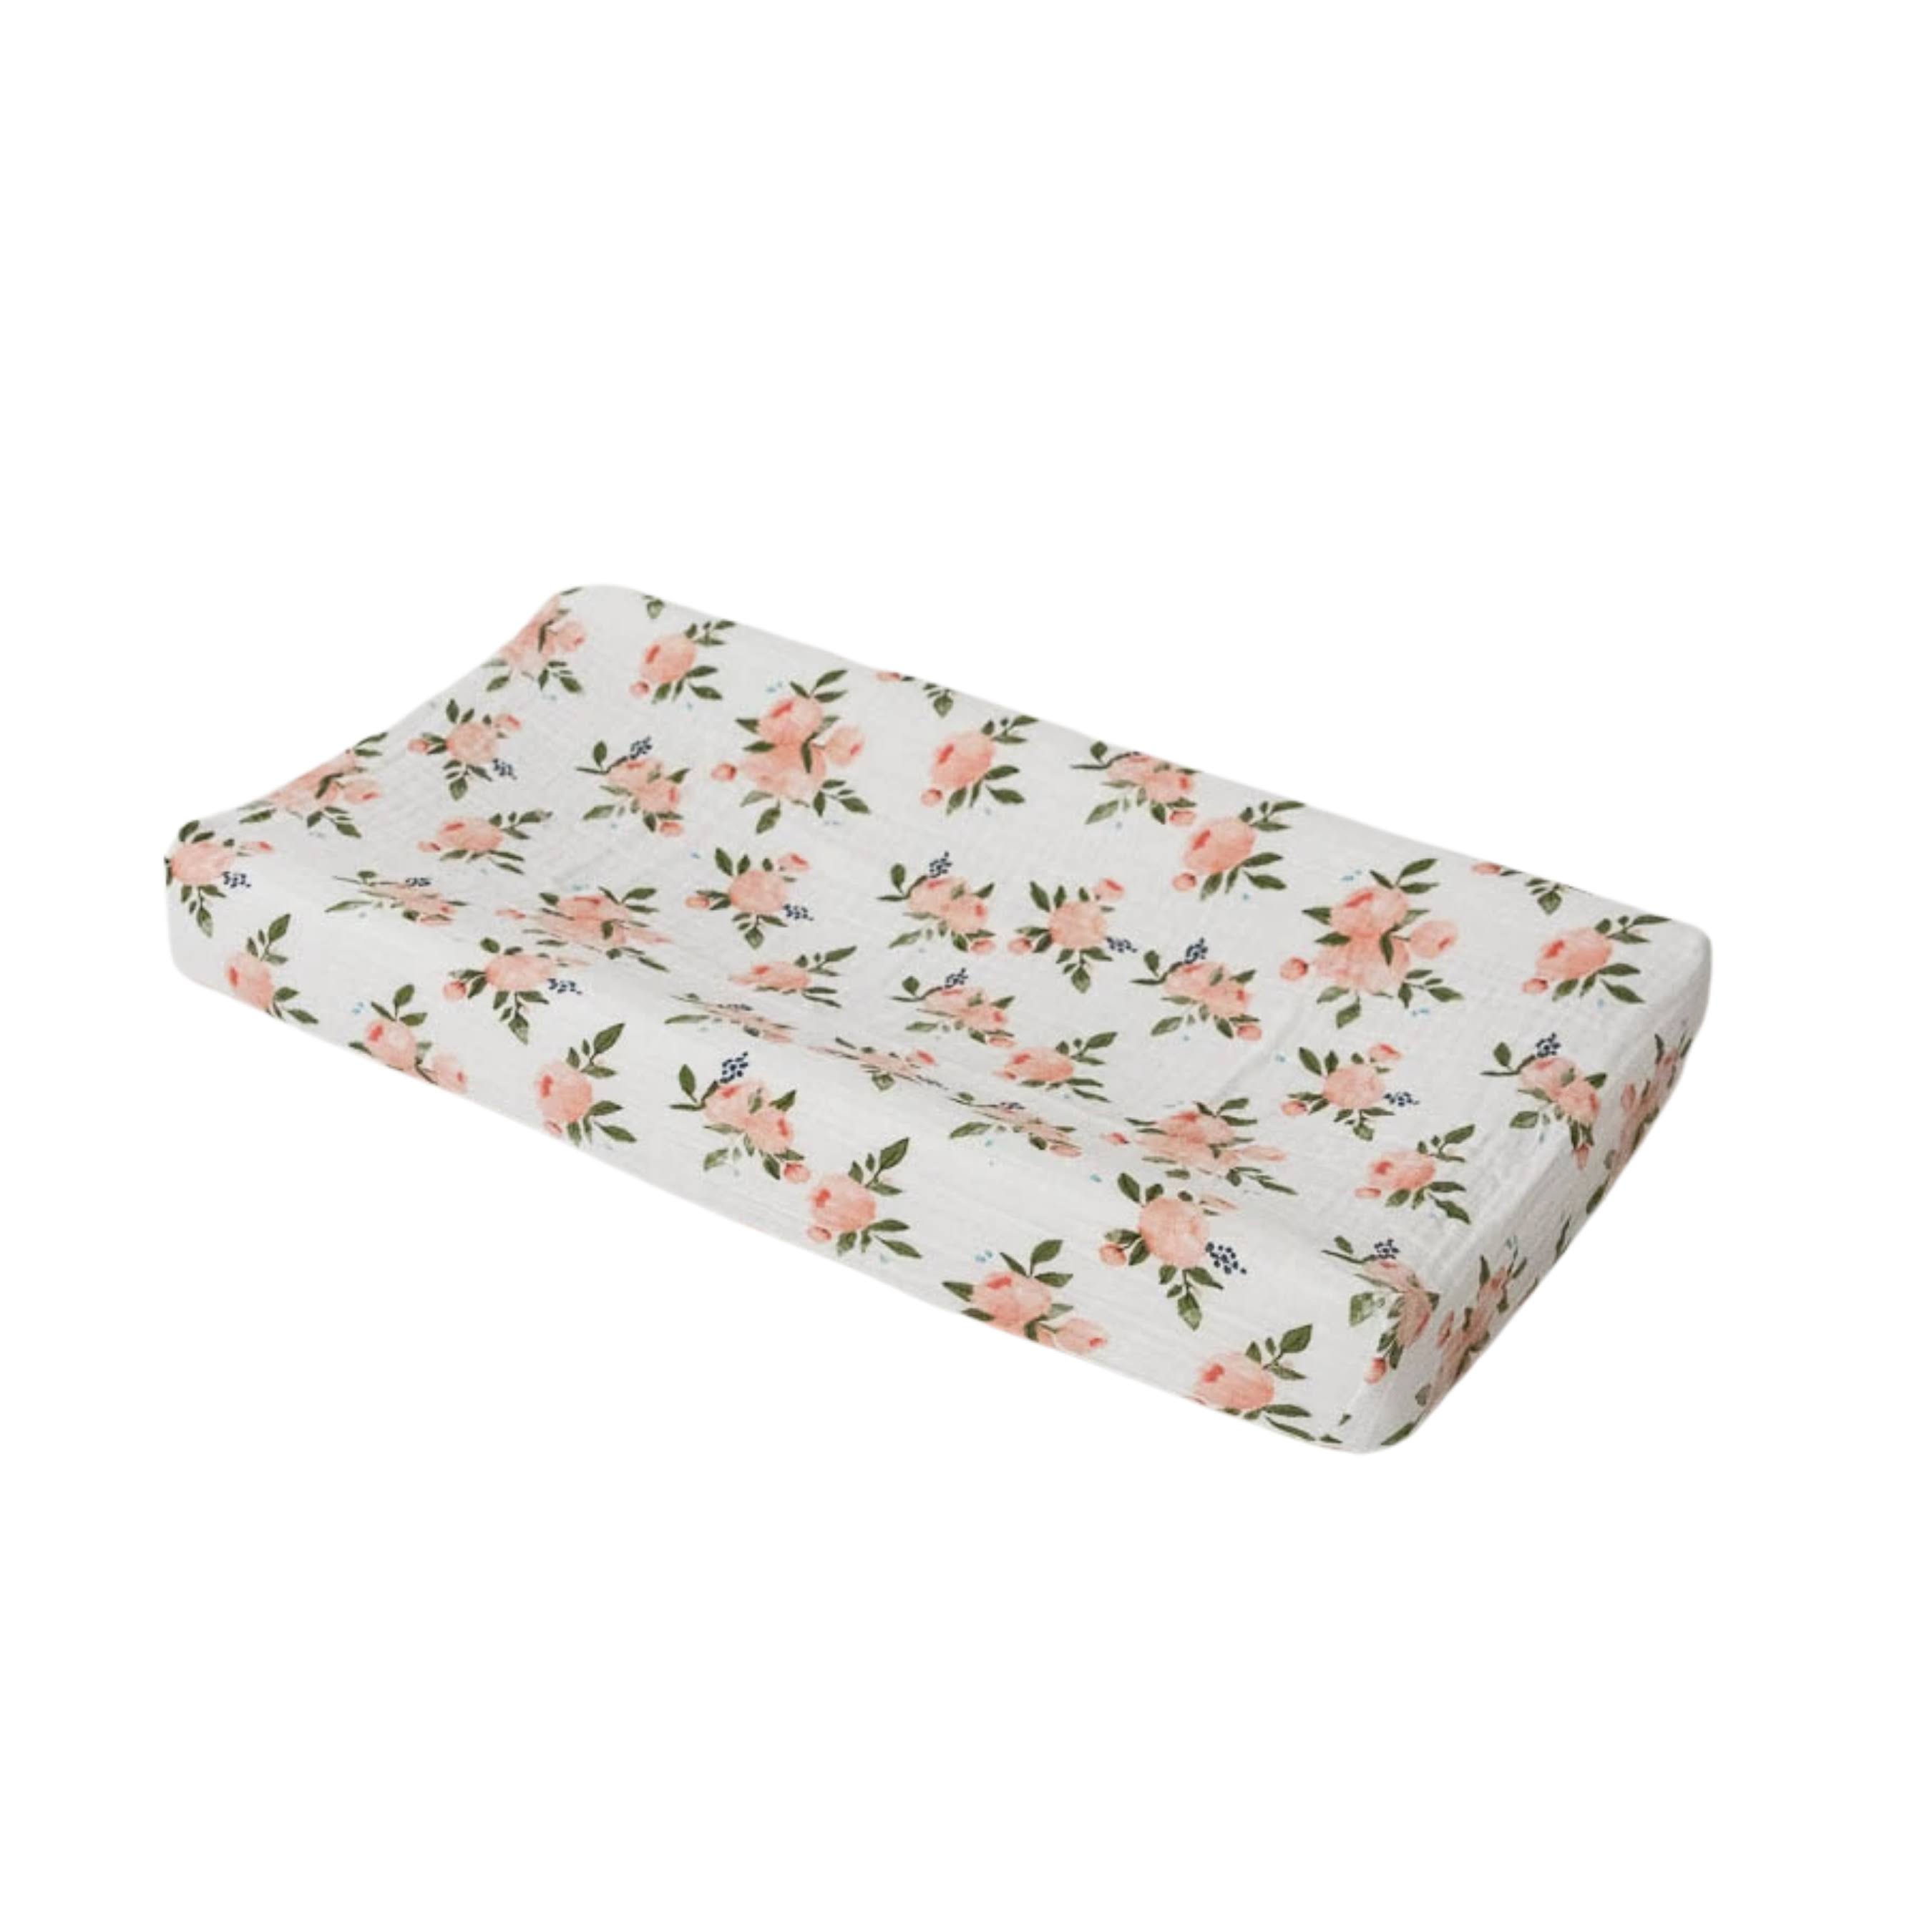 Little Unicorn Cotton Muslin Changing Pad Cover - Watercolor Roses